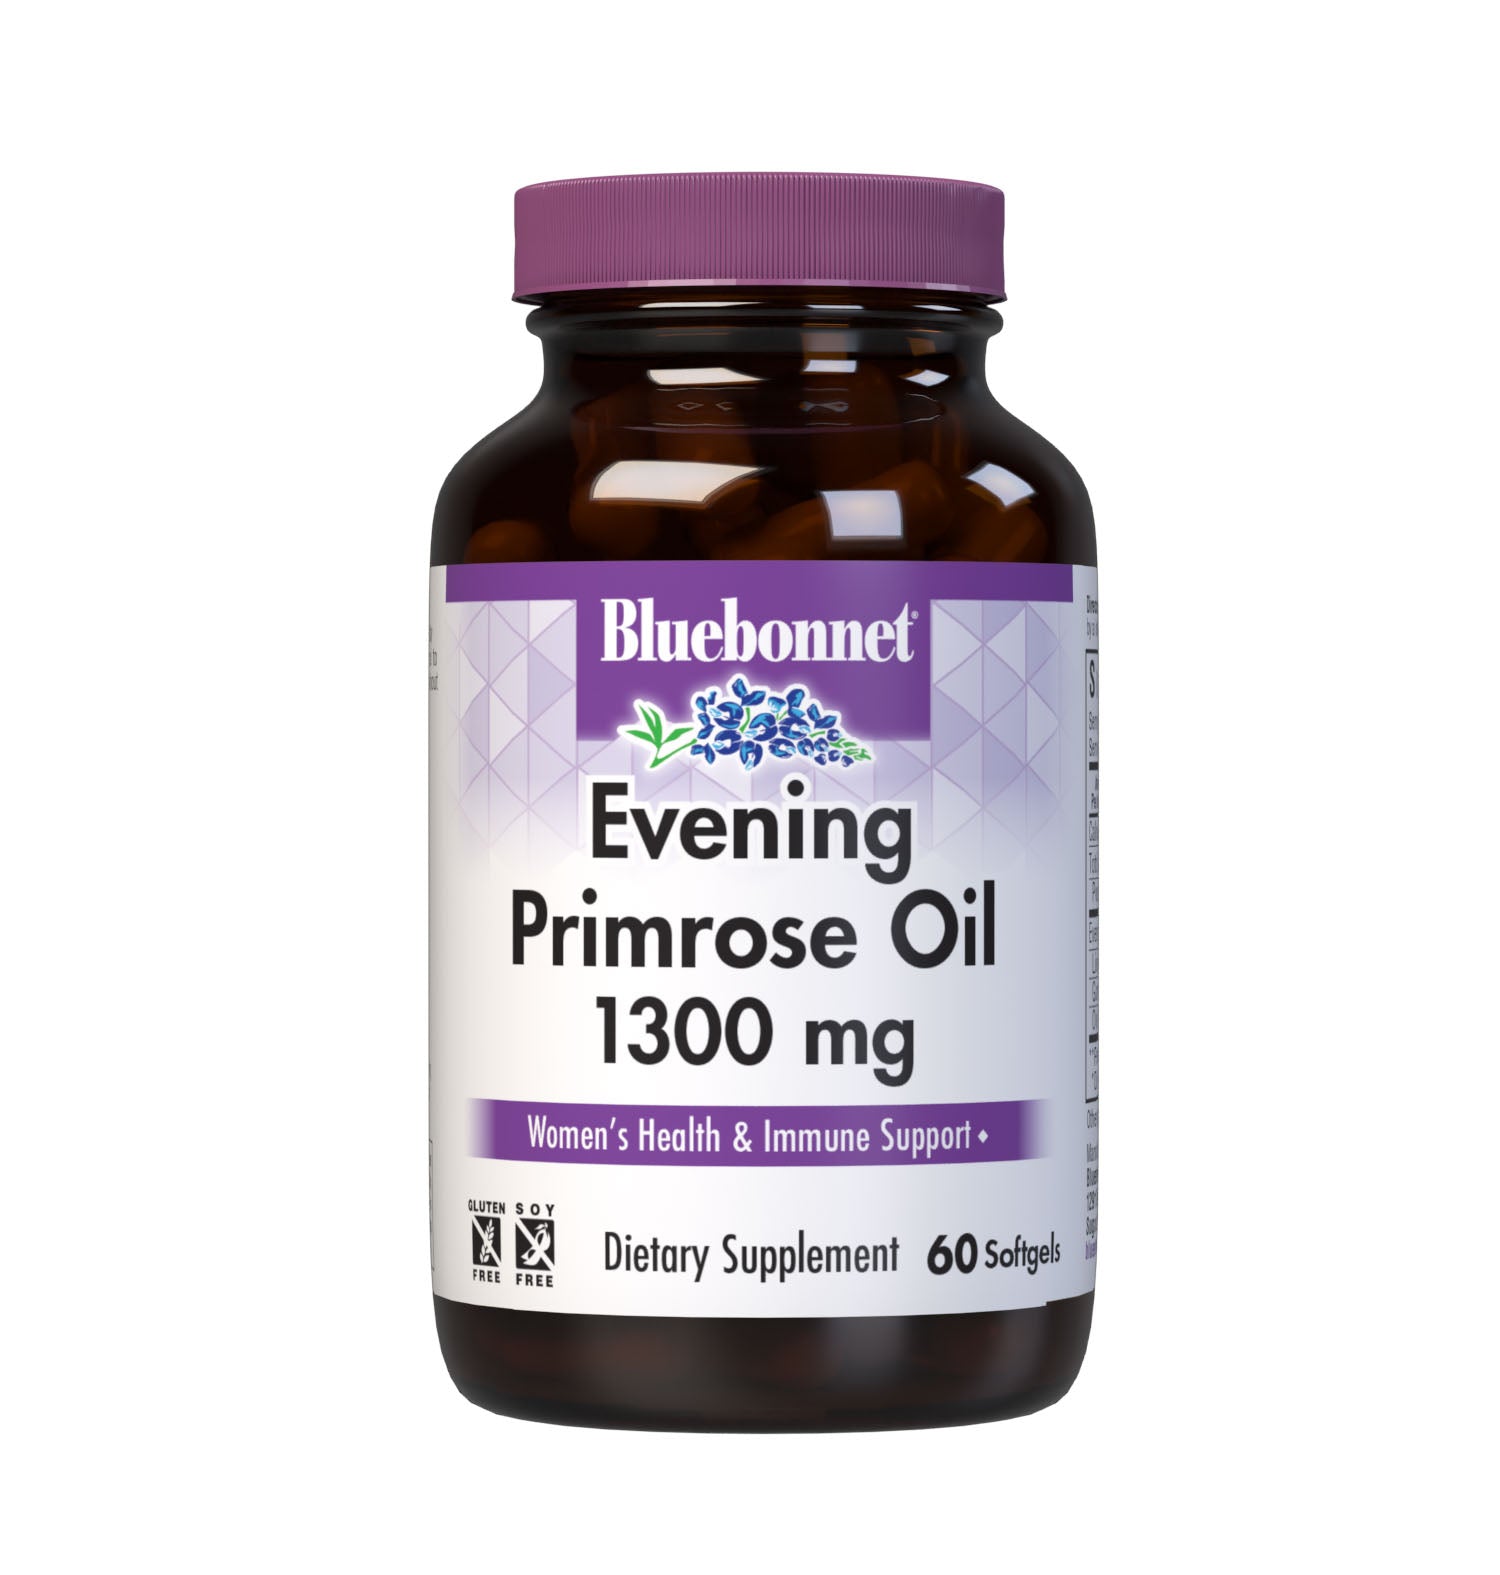 Bluebonnet’s Evening Primrose Oil 1300 mg 60 Softgels are formulated with an oil from the seed of the evening primrose seed oil, a source of unsaturated fatty acids- gamma linolenic acid (GLA), linolenic acid, and oleic acid to support women's health and immune health. Cold pressed without the use of chemical solvents. #size_60 count